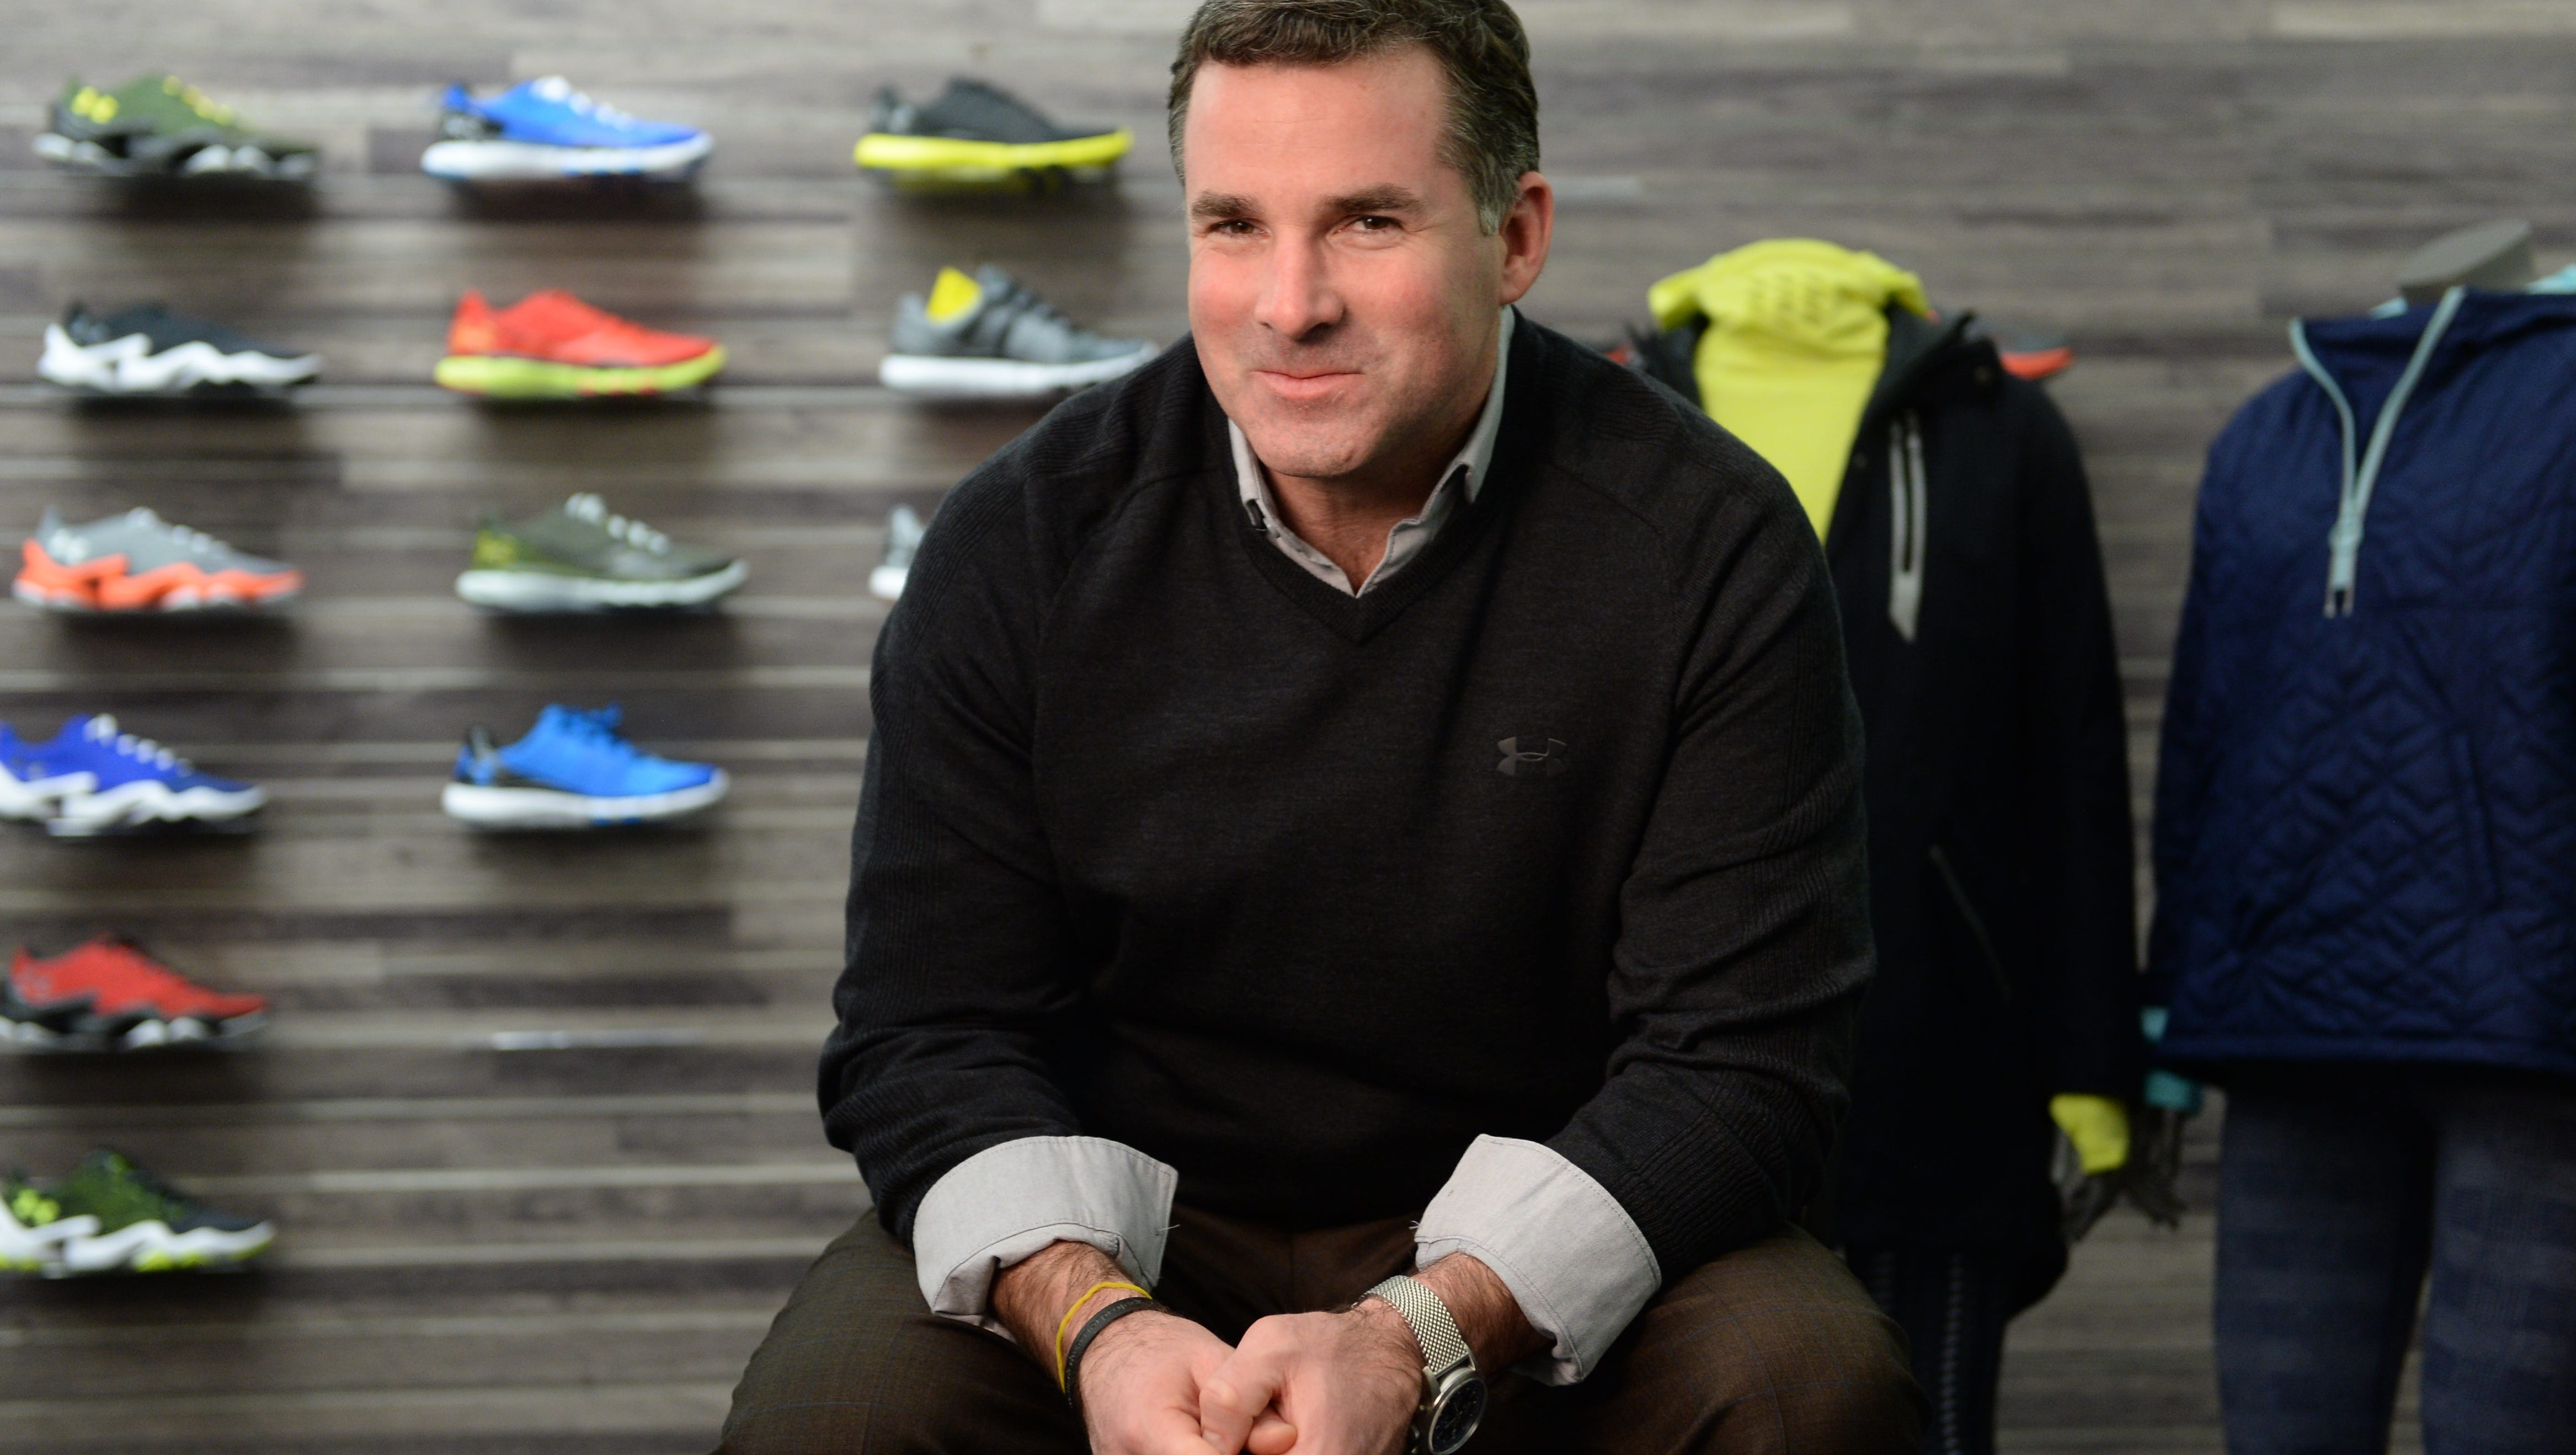 Under Armour CEO Kevin Plank steps down turnaround